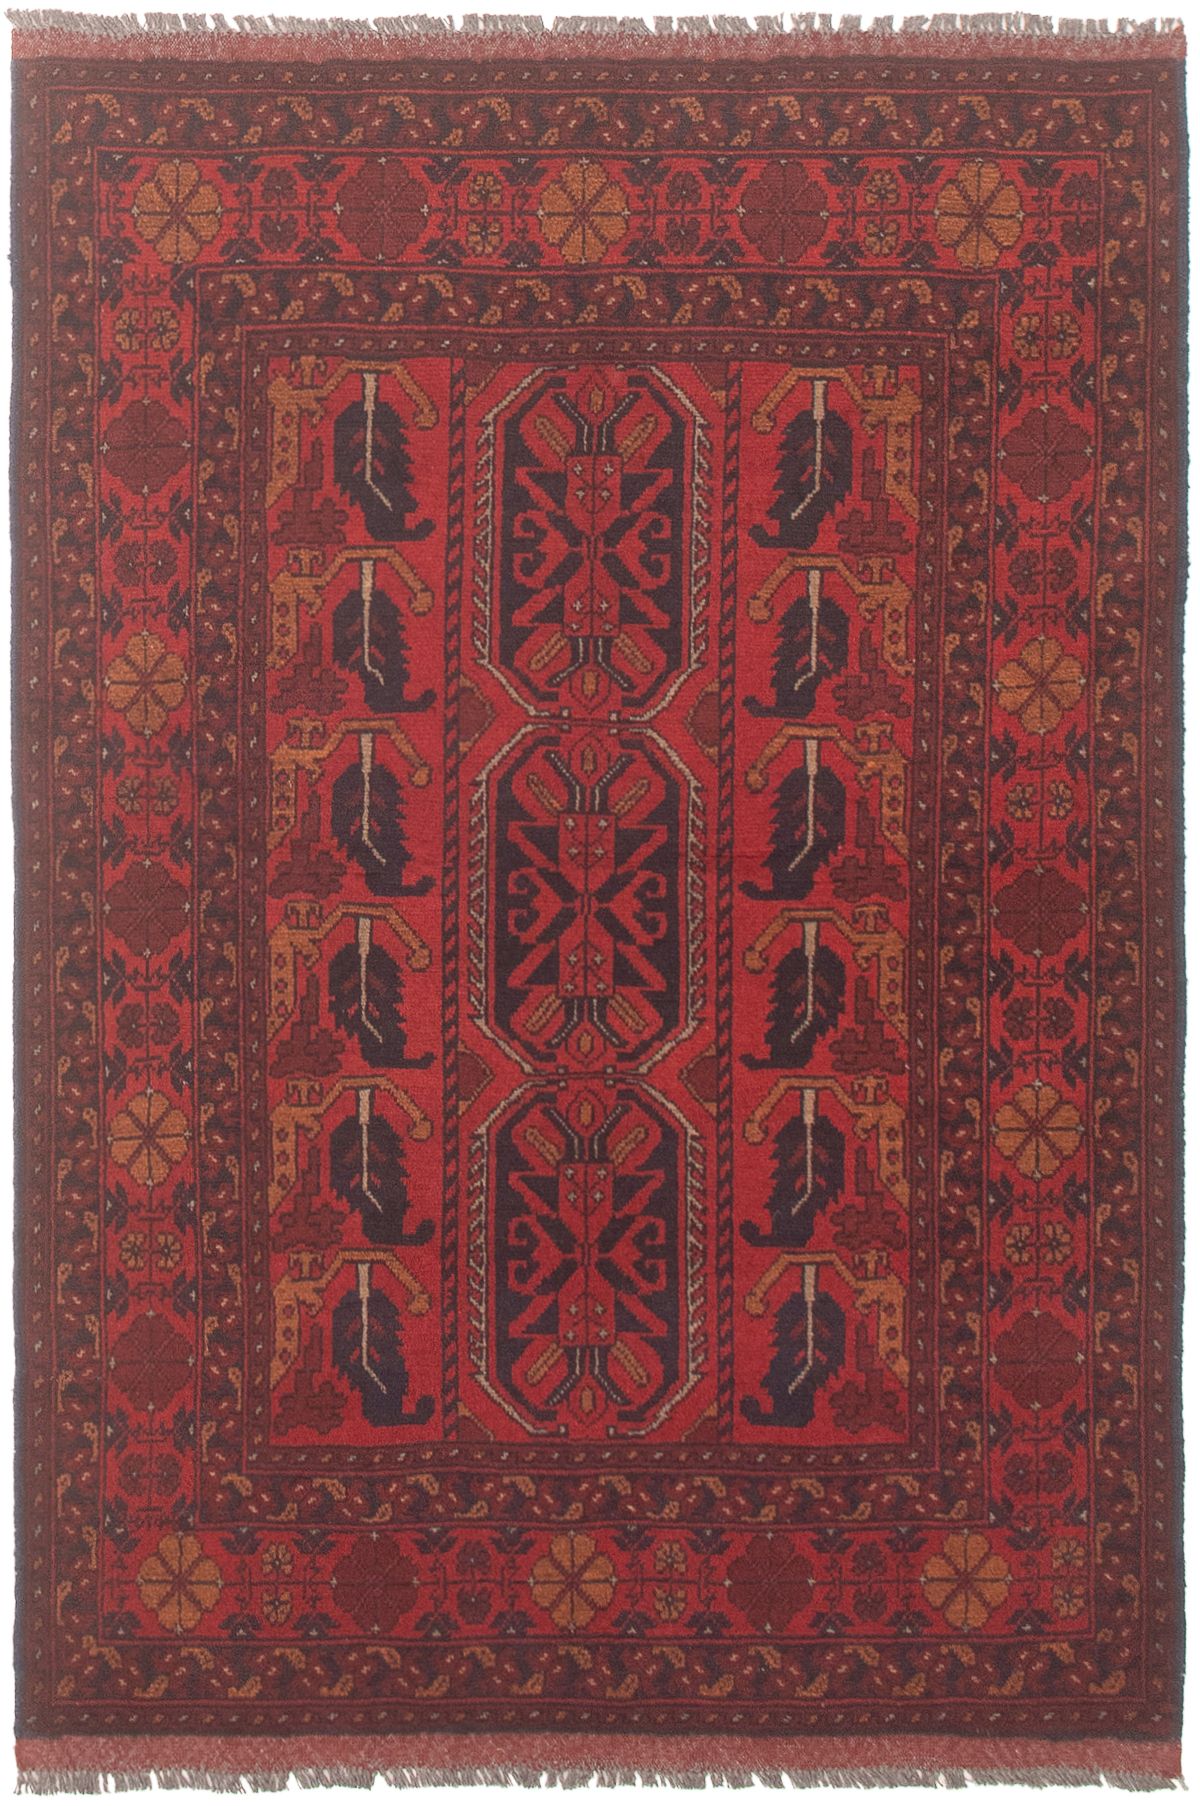 Hand-knotted Finest Khal Mohammadi Red Wool Rug 3'4" x 4'9" (30) Size: 3'4" x 4'9"  